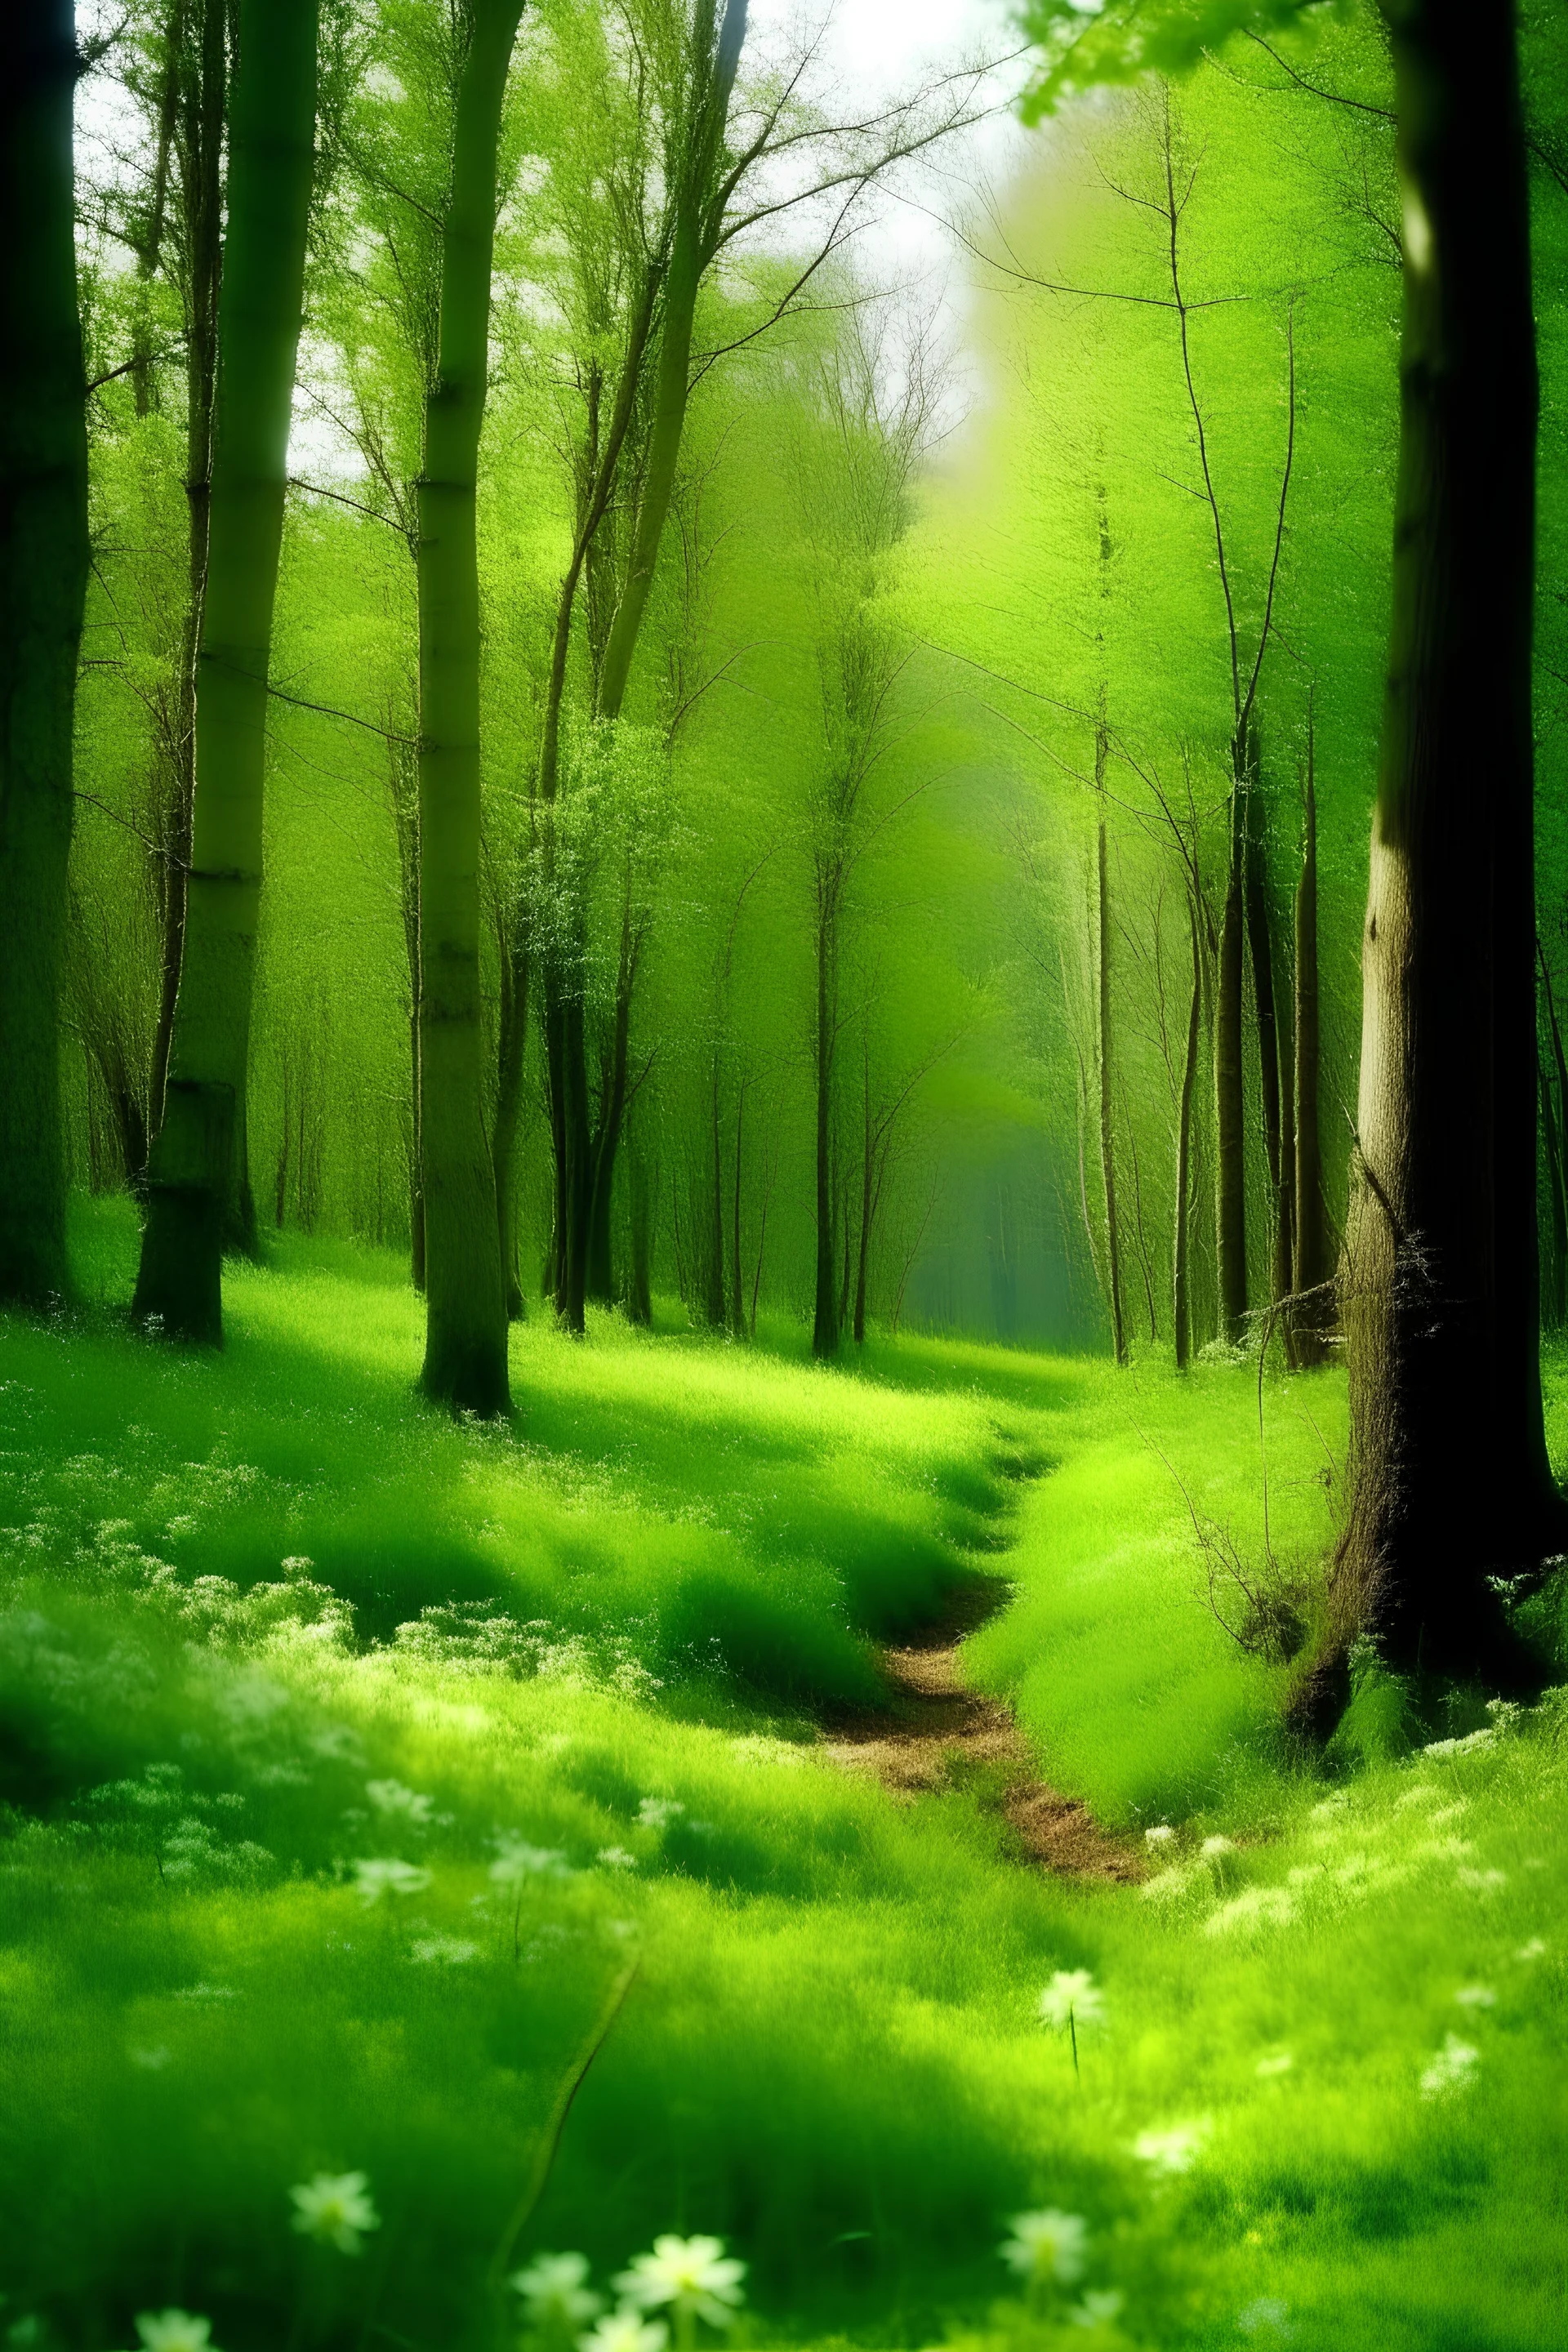 forest in spring season